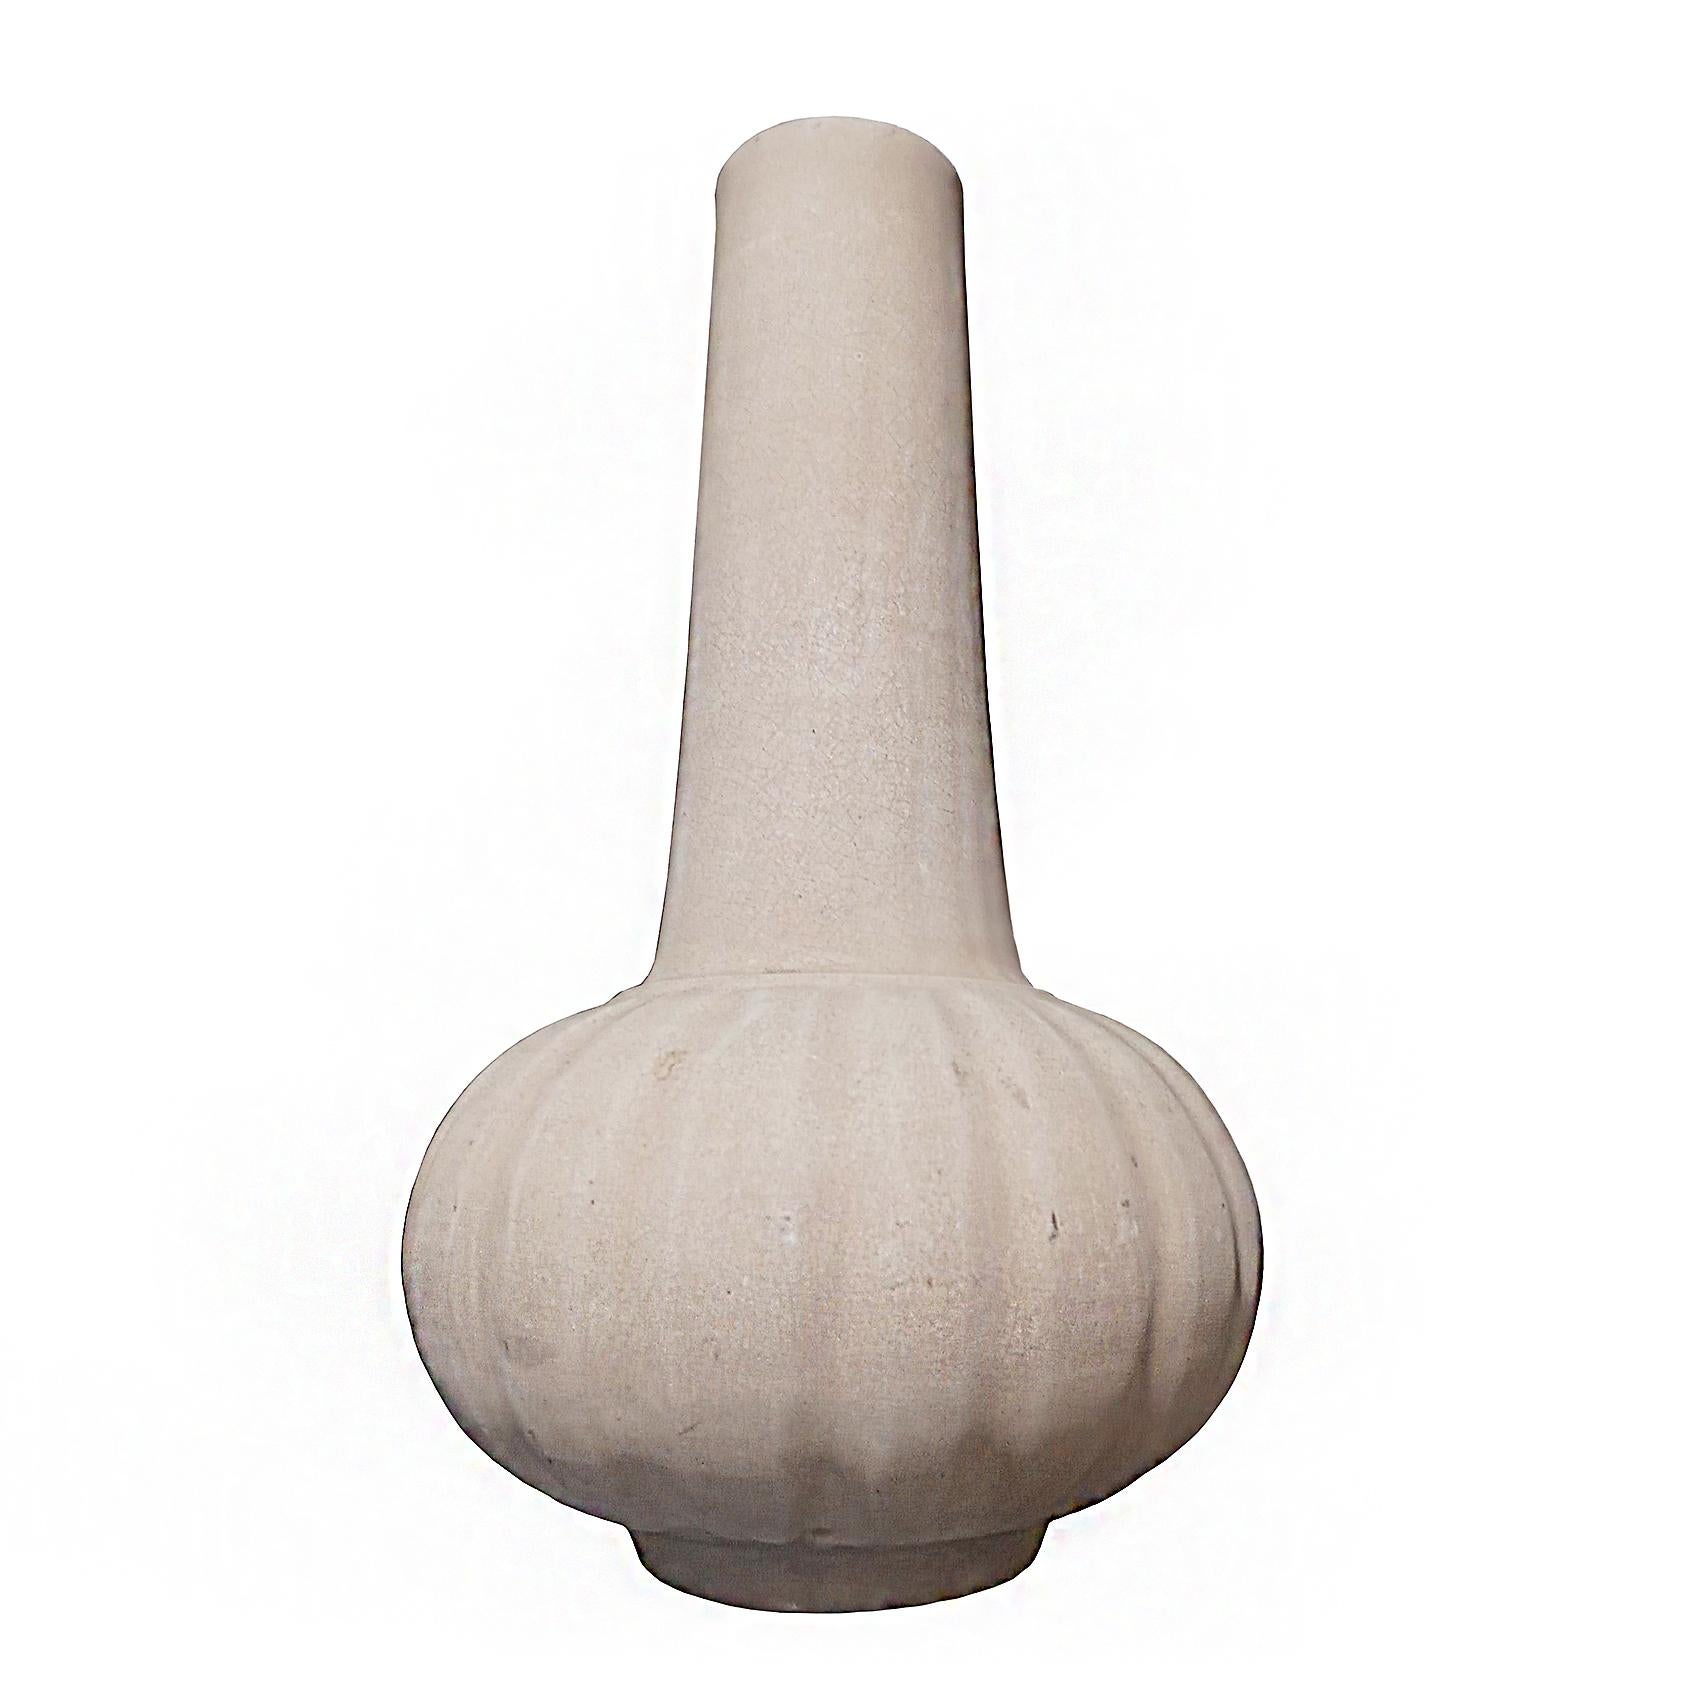 A ceramic vase from Thailand, with light cream opaque glaze. Contemporary. 

While the golden age of Thai ceramics ended around the 15-16th Centuries, local craftsmen learned the art through generations, later producing smaller numbers of pieces